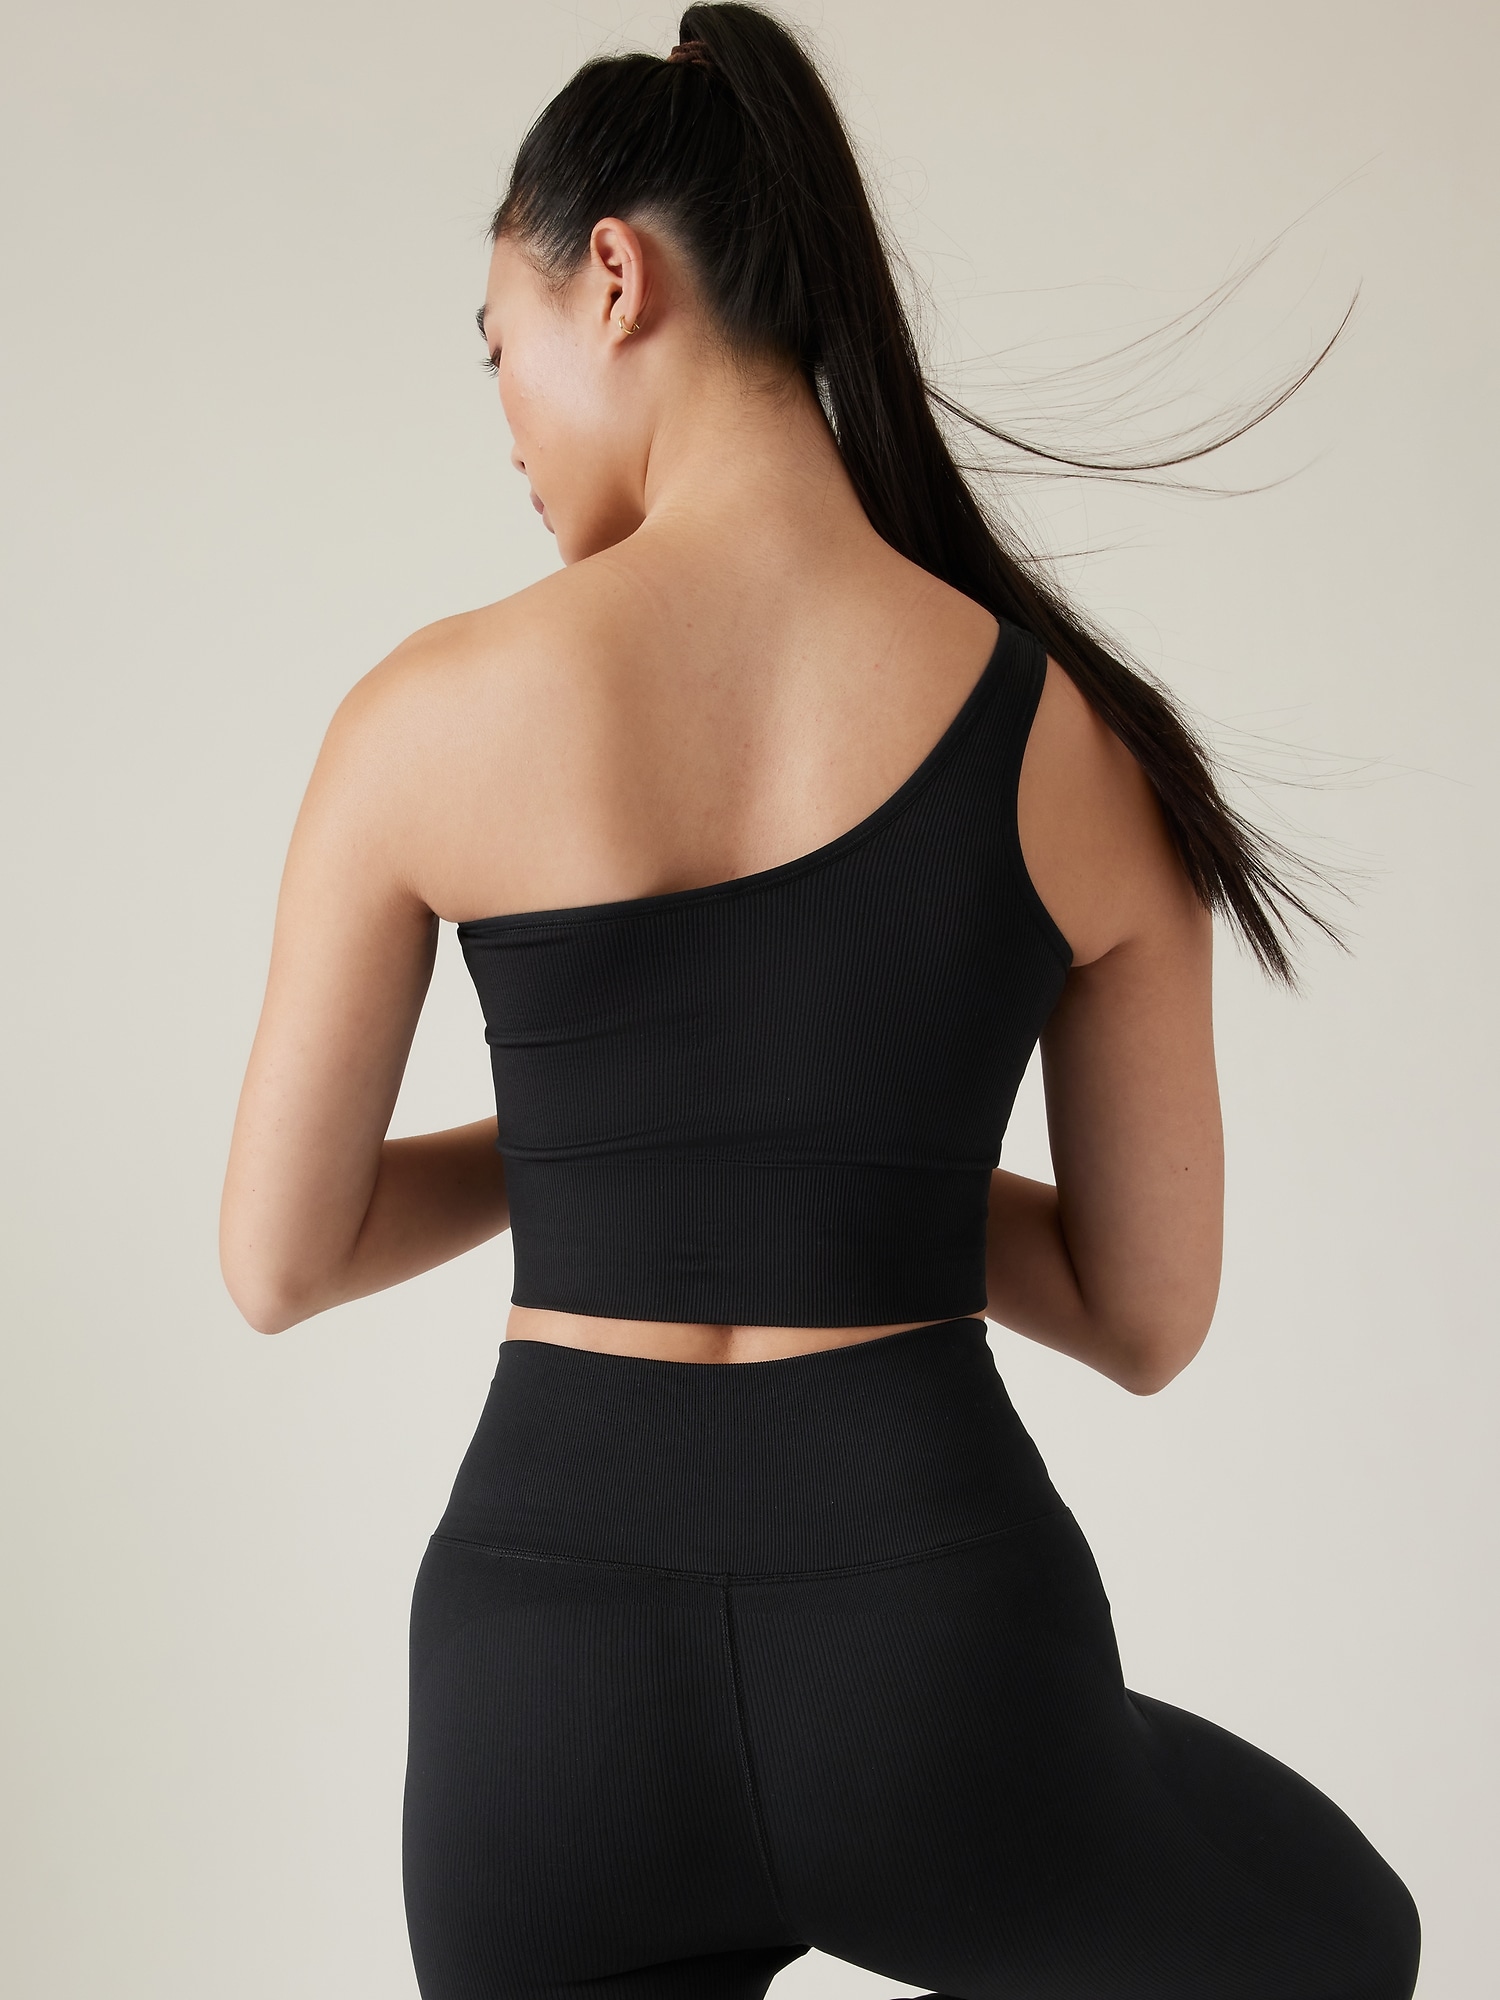 One shoulder sports bras are in, but are they practical?